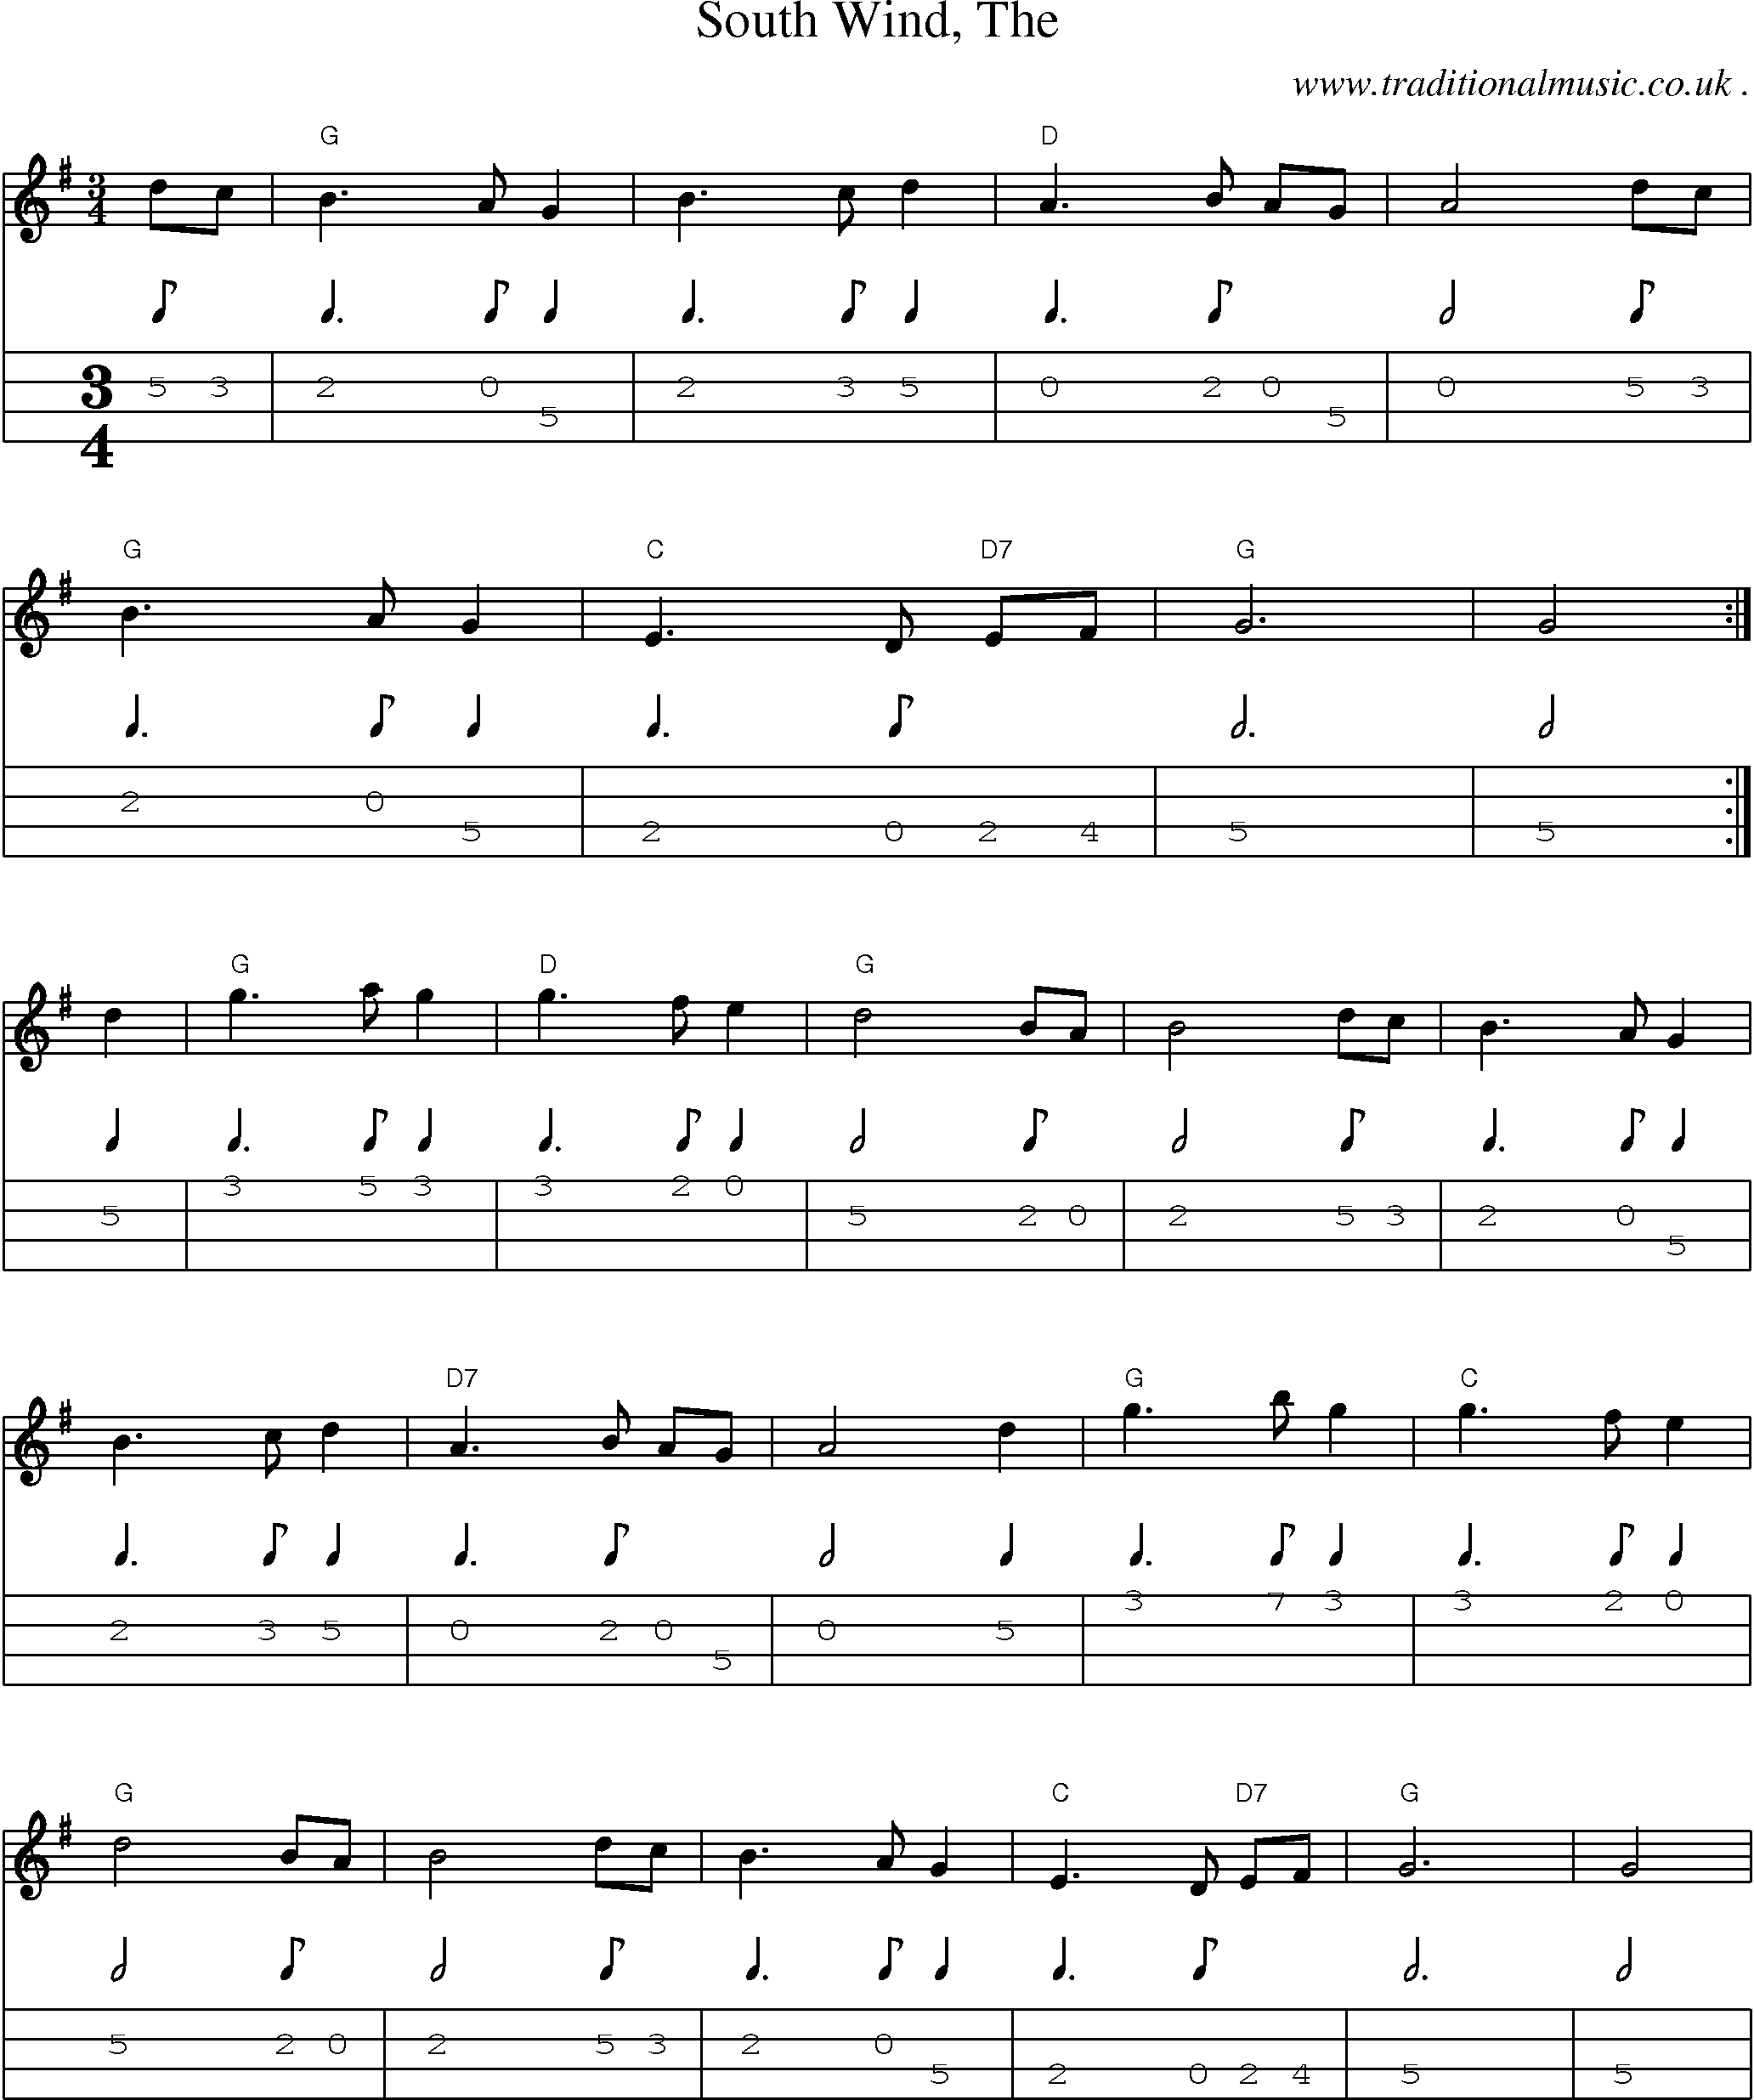 Music Score and Guitar Tabs for South Wind The